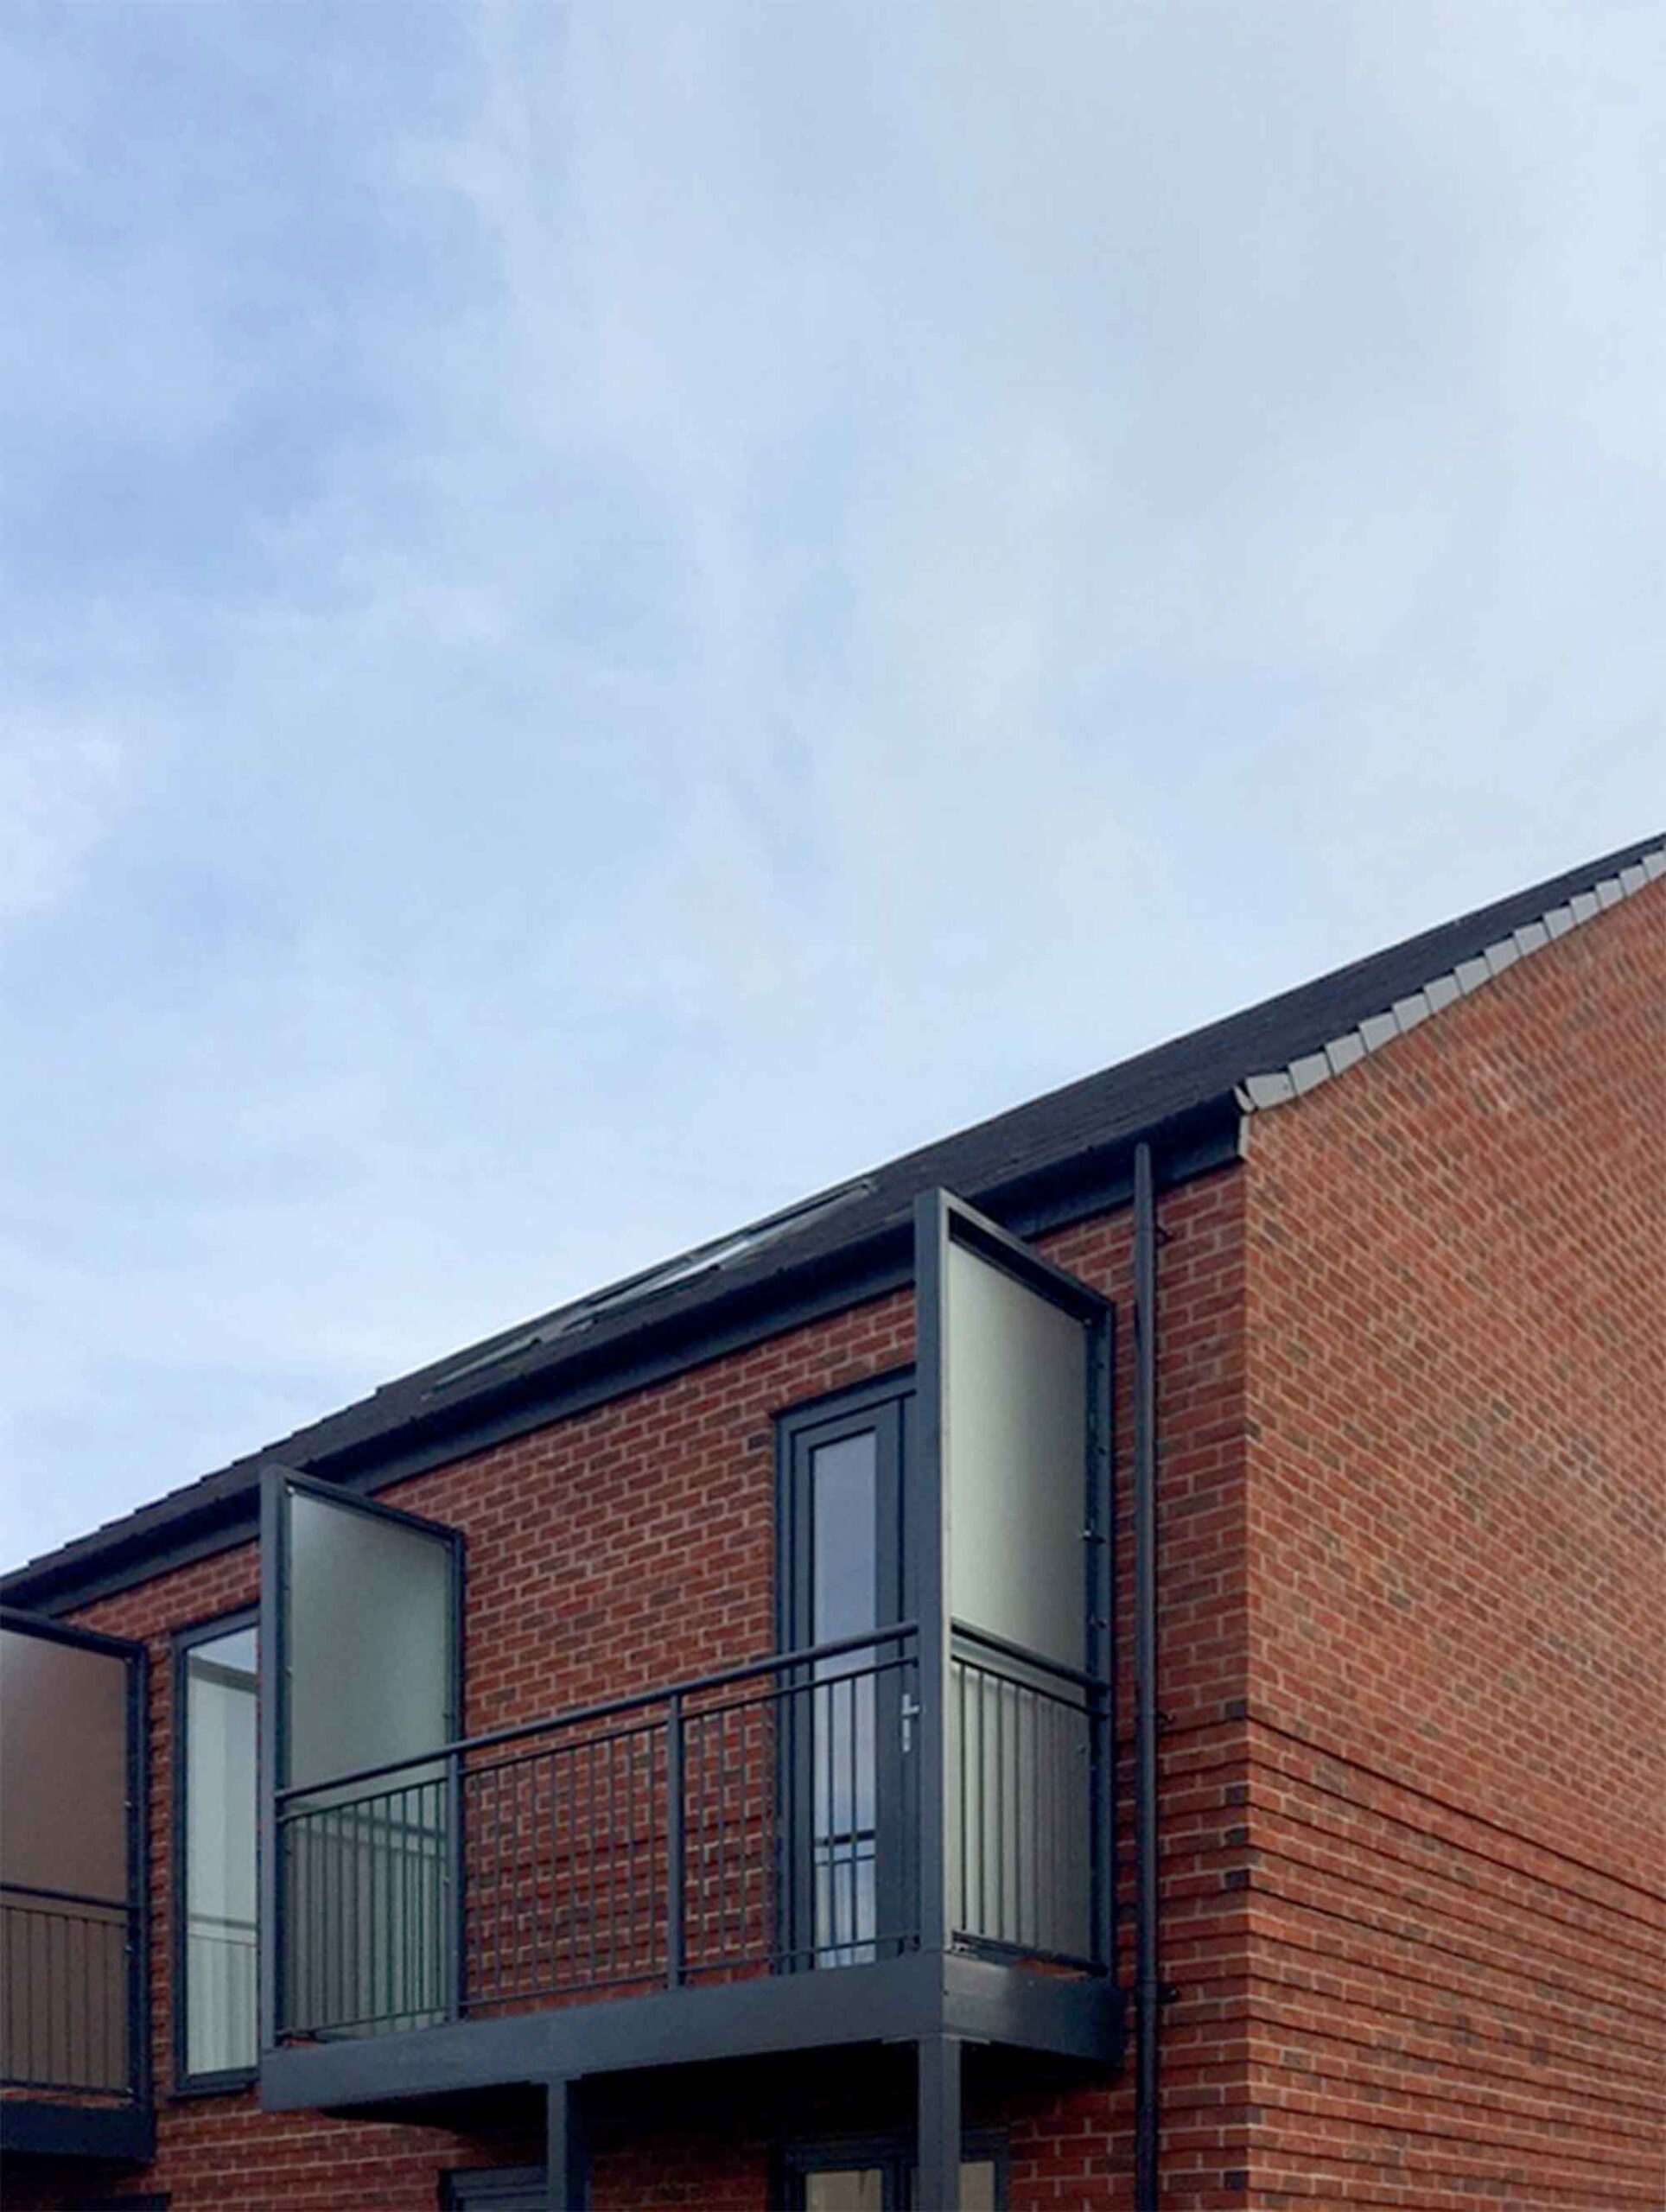 taylor-wimpey-openstudio-architects-exterior-detail